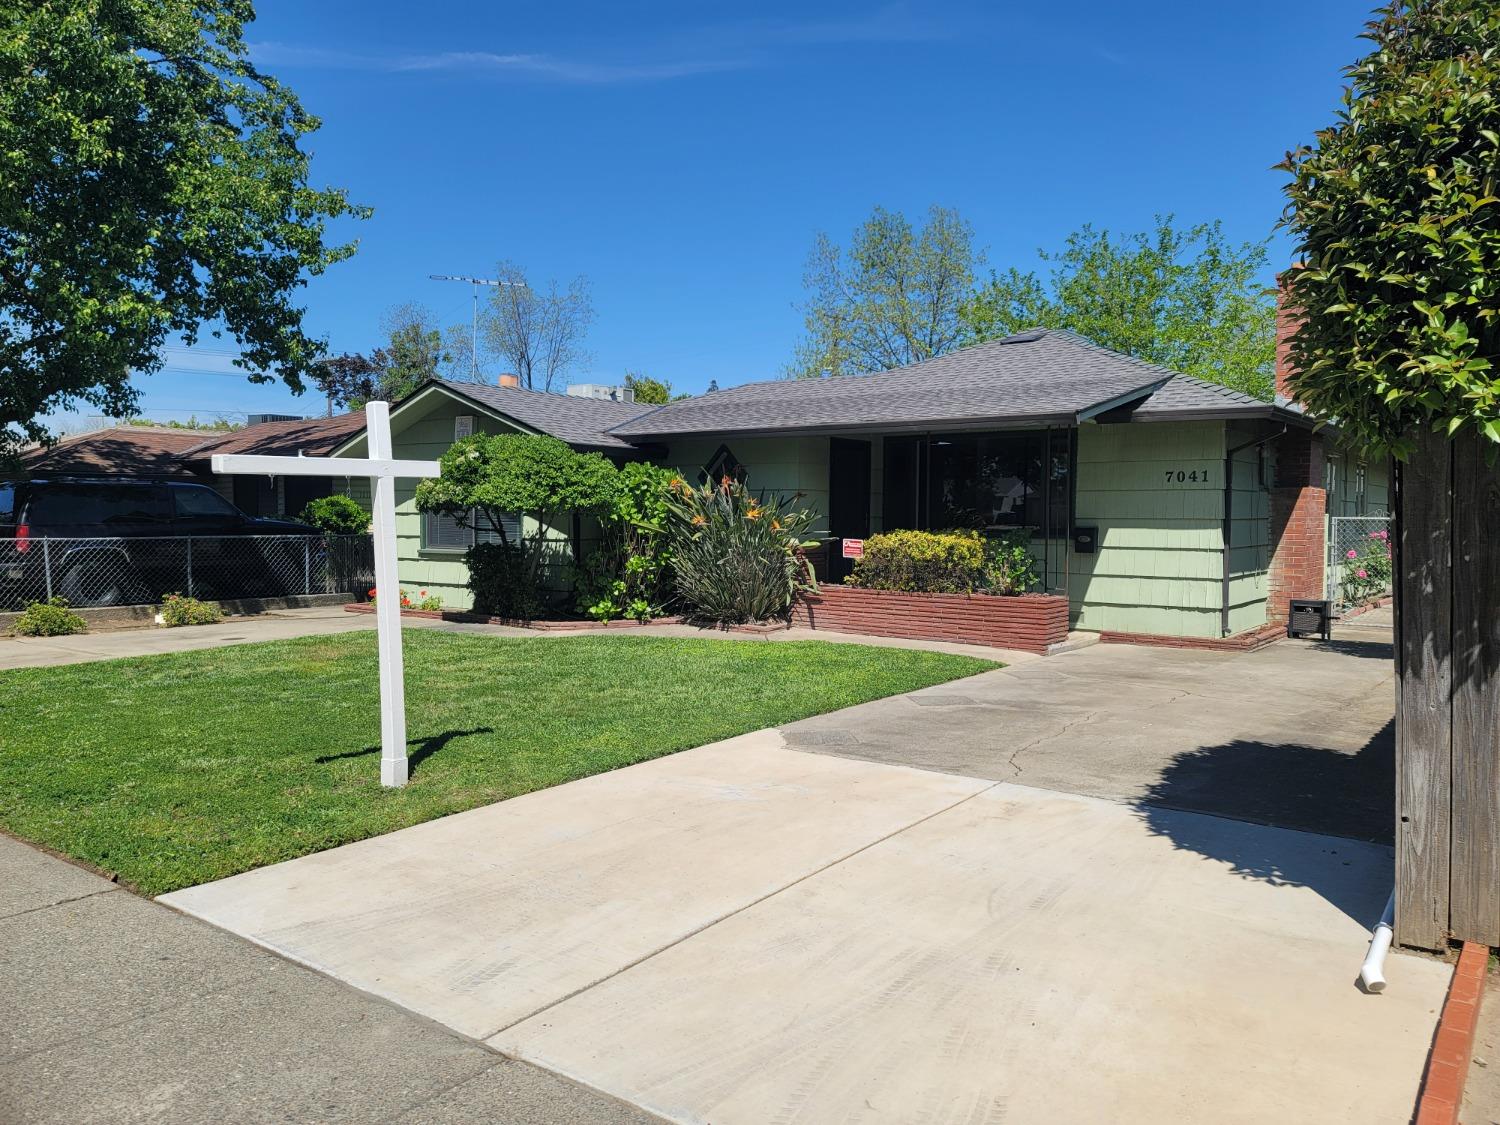 Photo of 7041 21st Ave in Sacramento, CA